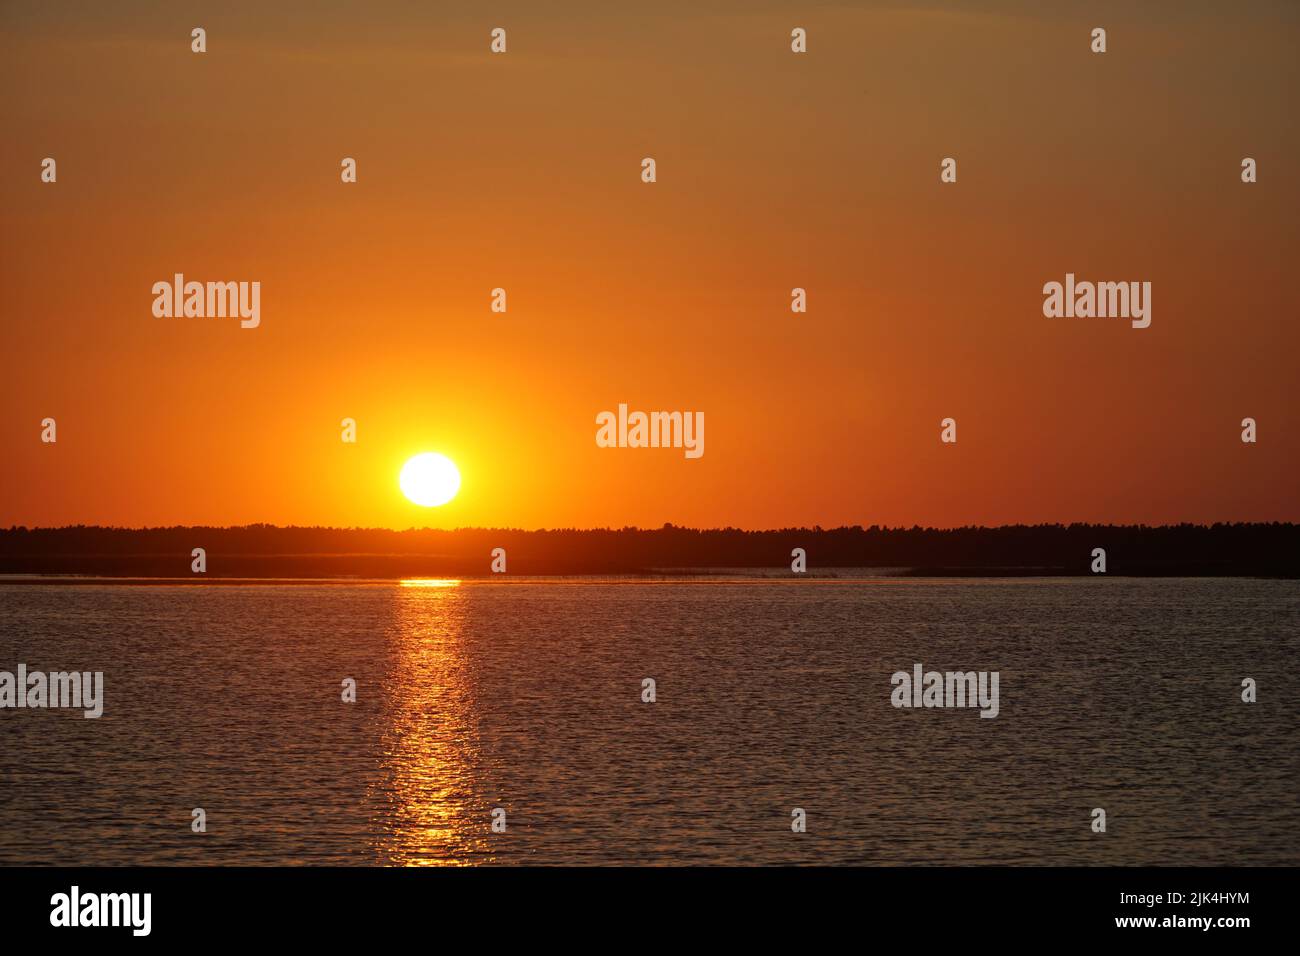 Sunset over the Lebsko lake, Pomeranian Voivodeship, Poland. Summer evening, clear sky, reflection of light in the water. Stock Photo